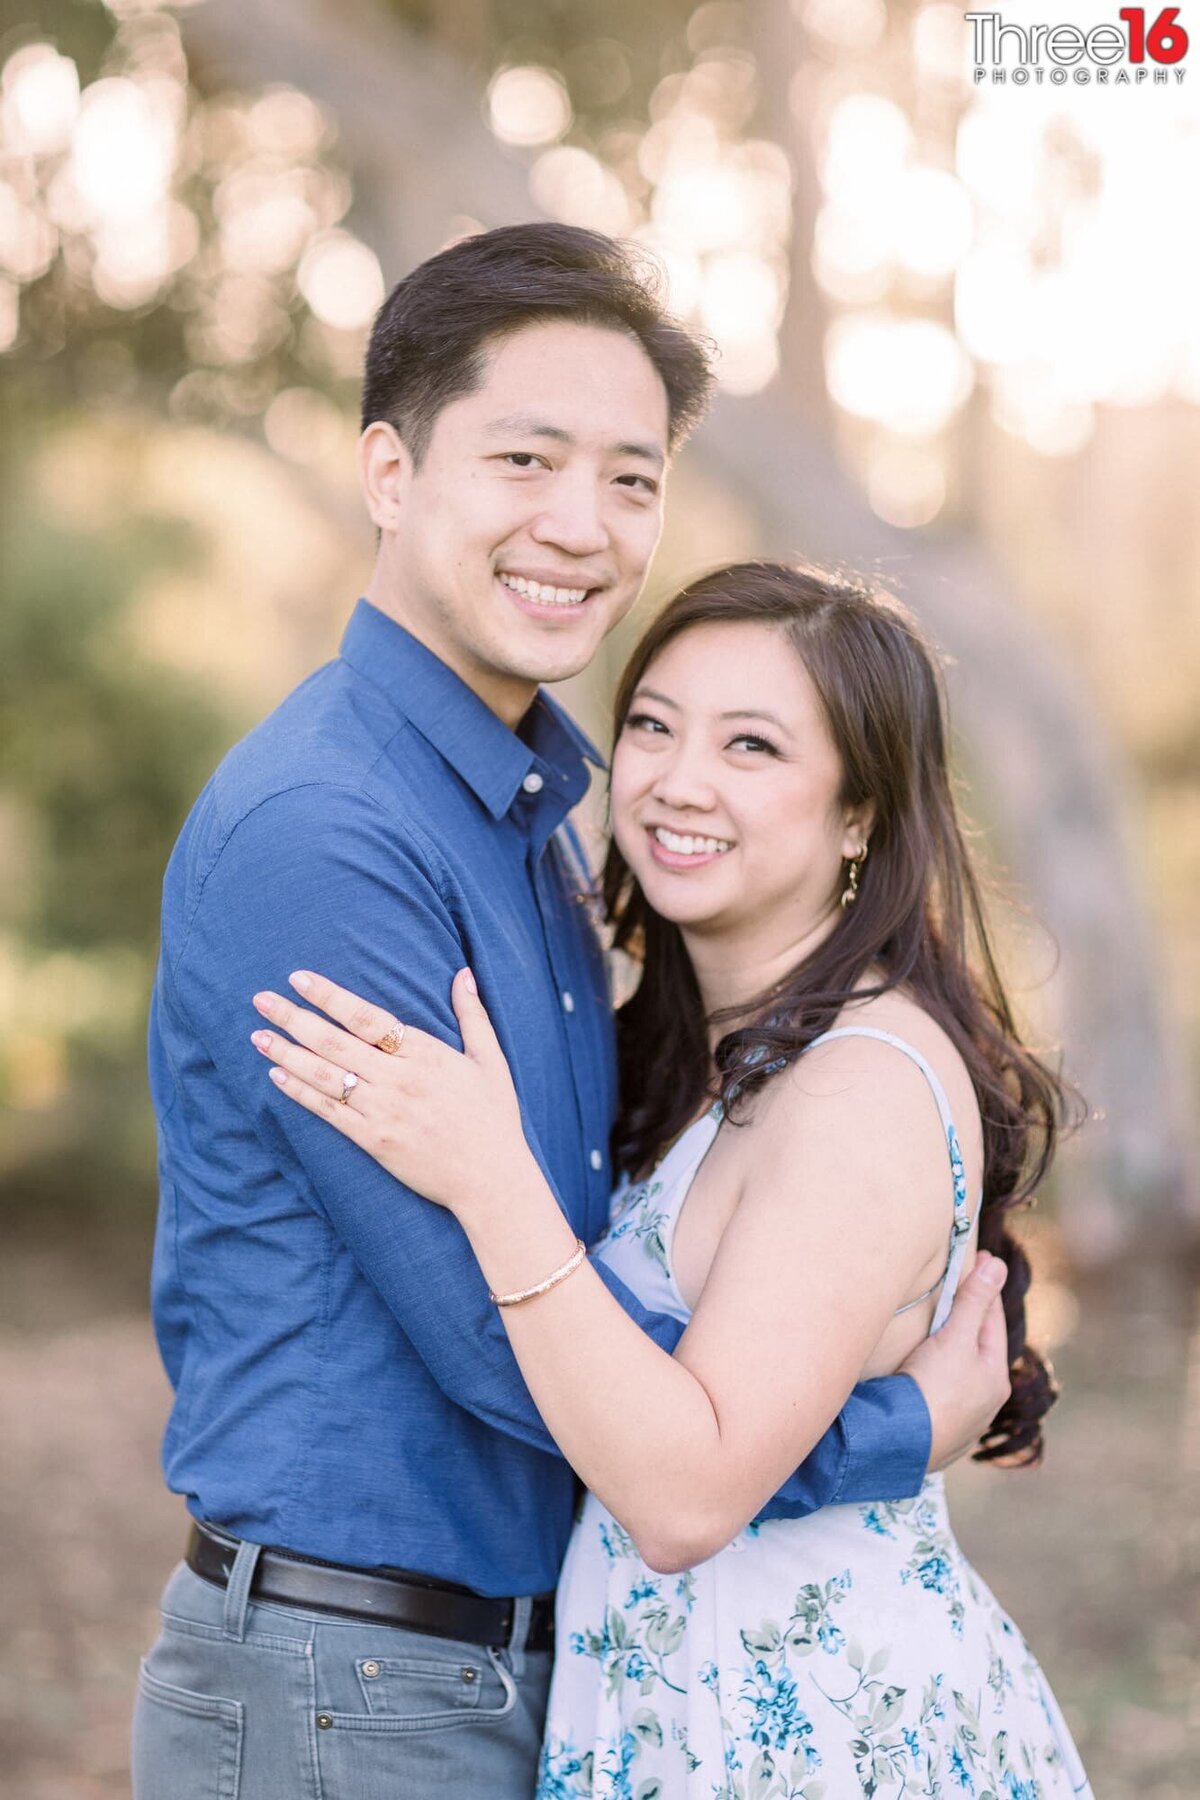 Engaged couple embrace one another during photo shoot